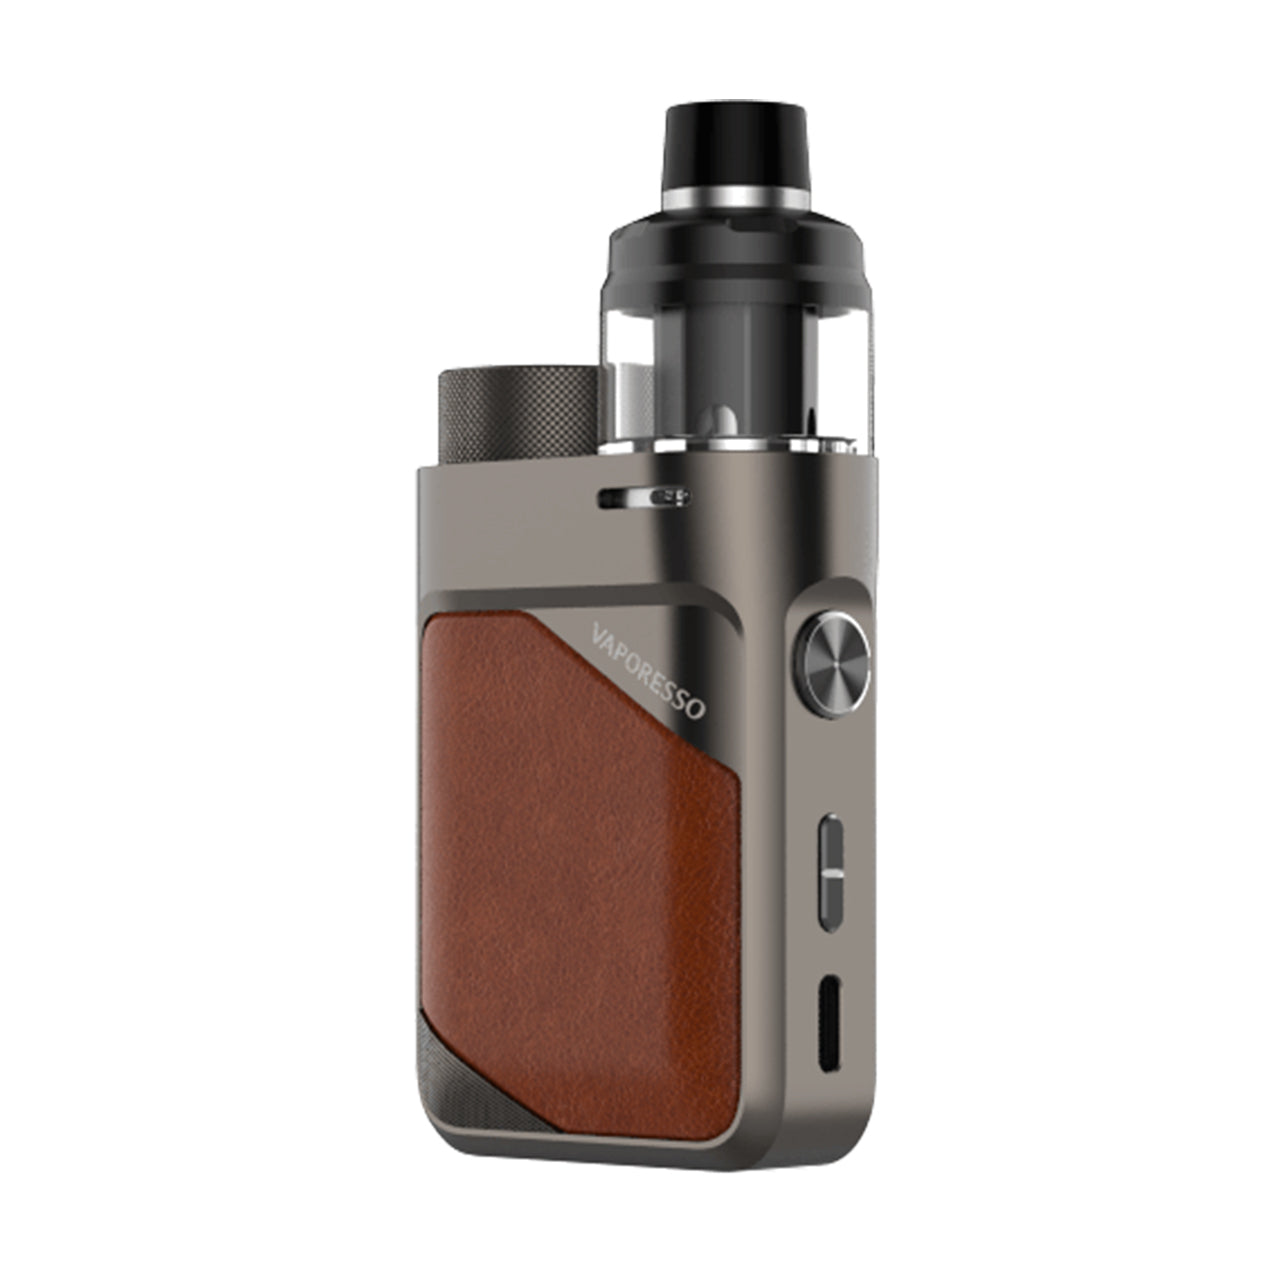 Vaporesso - Swag PX80 80W Kit with Swag Pod Tank